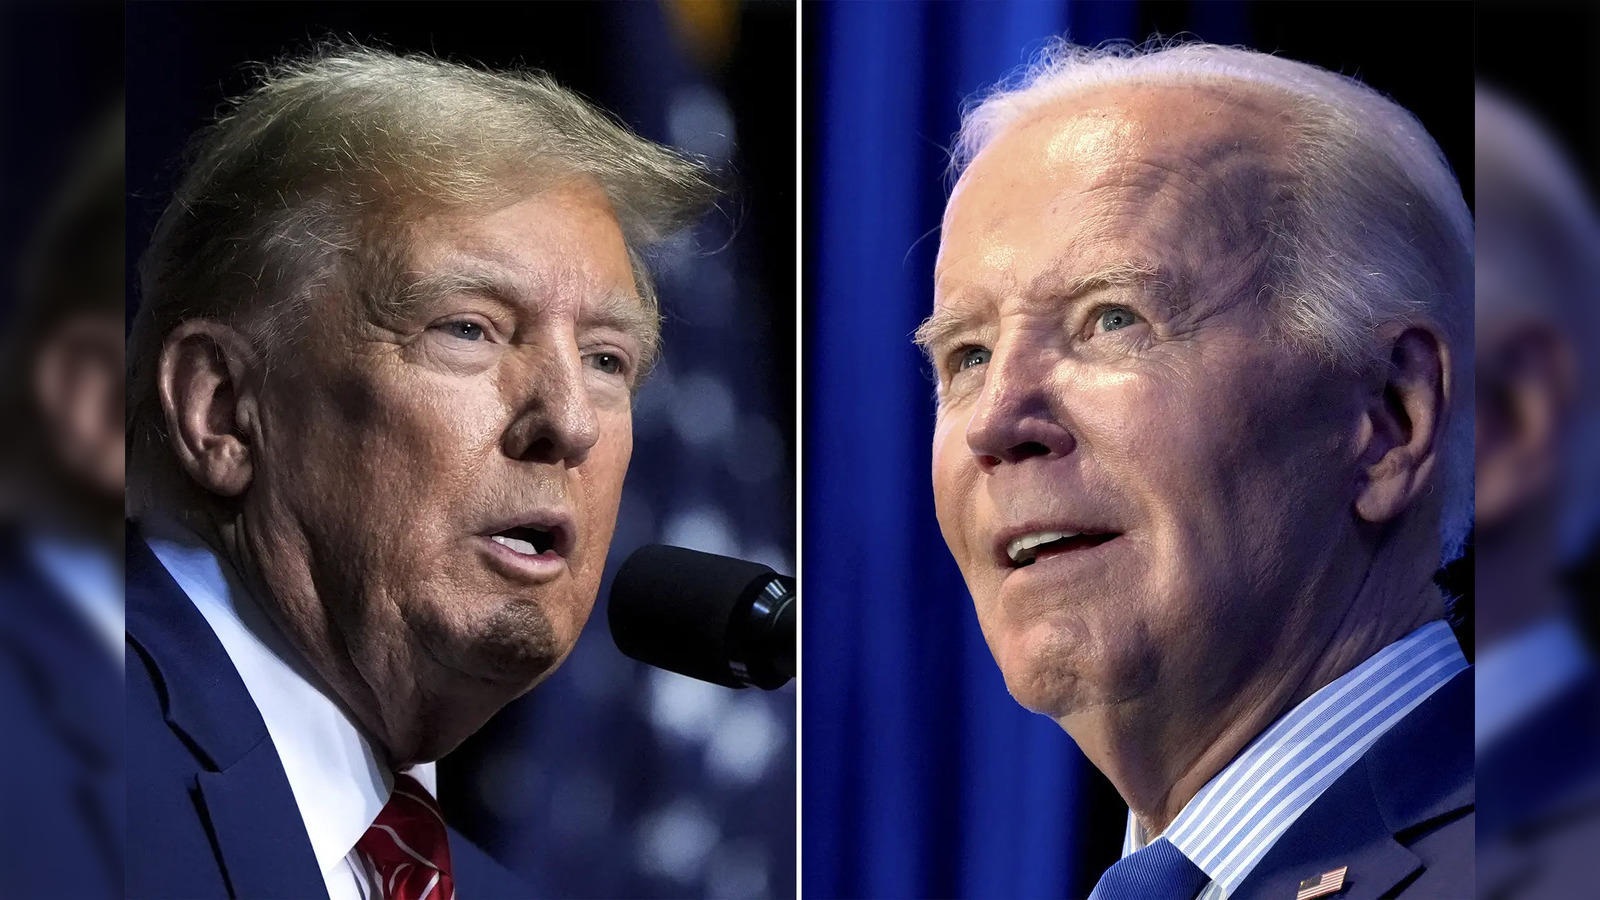 Biden Faces High-Stakes Gamble, Including Nomination Risk, Ahead of Trump Debate